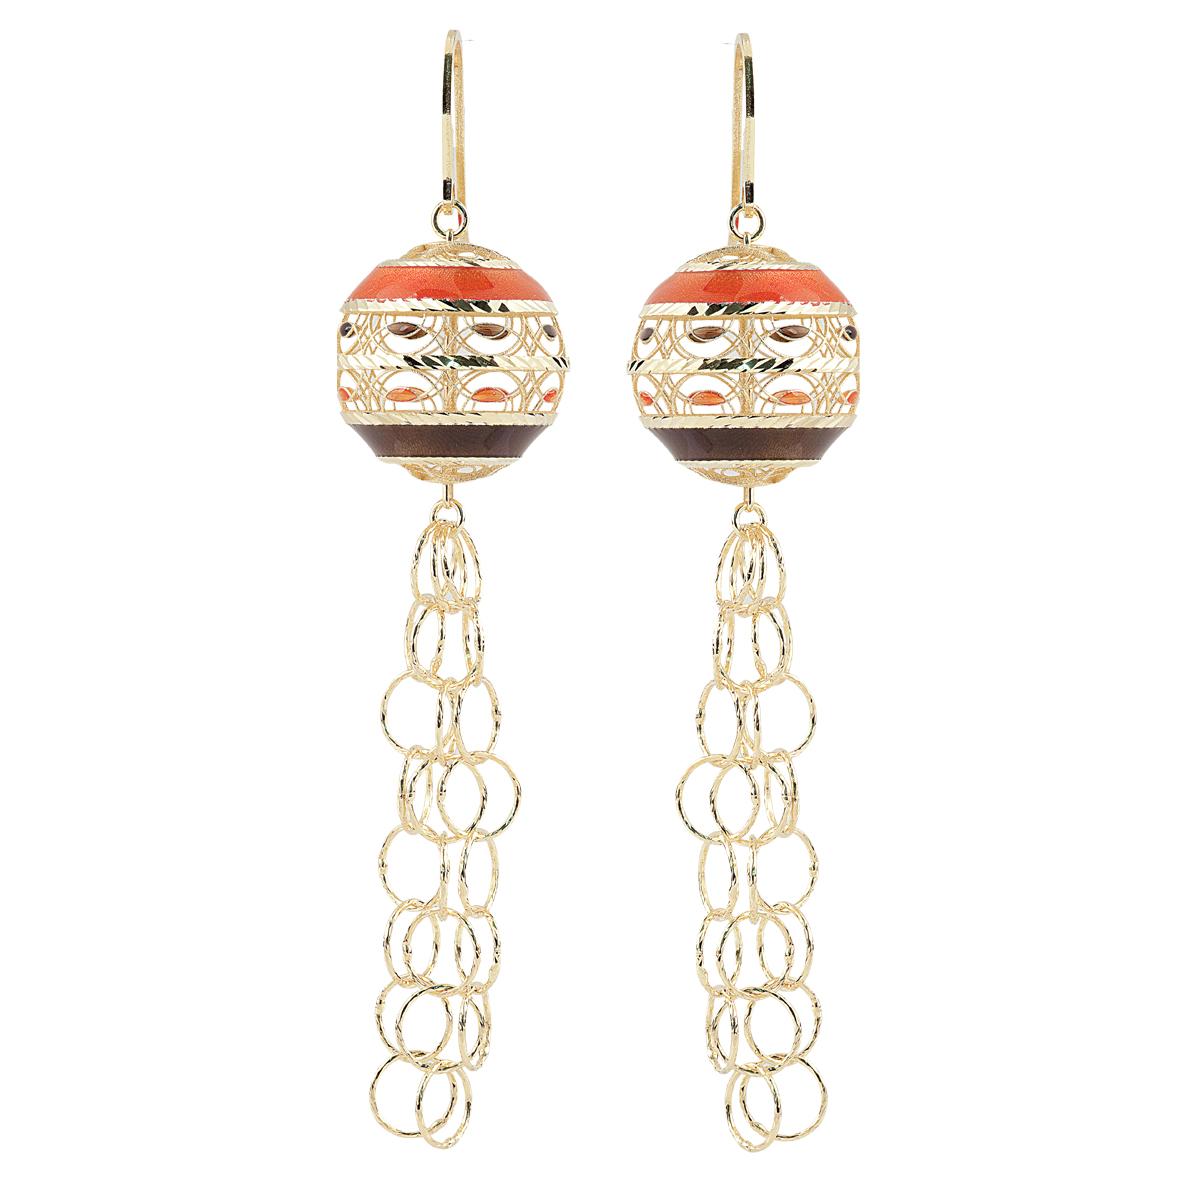 Earrings in 925 silver, gilded and enamelled - ZOR1110-MG